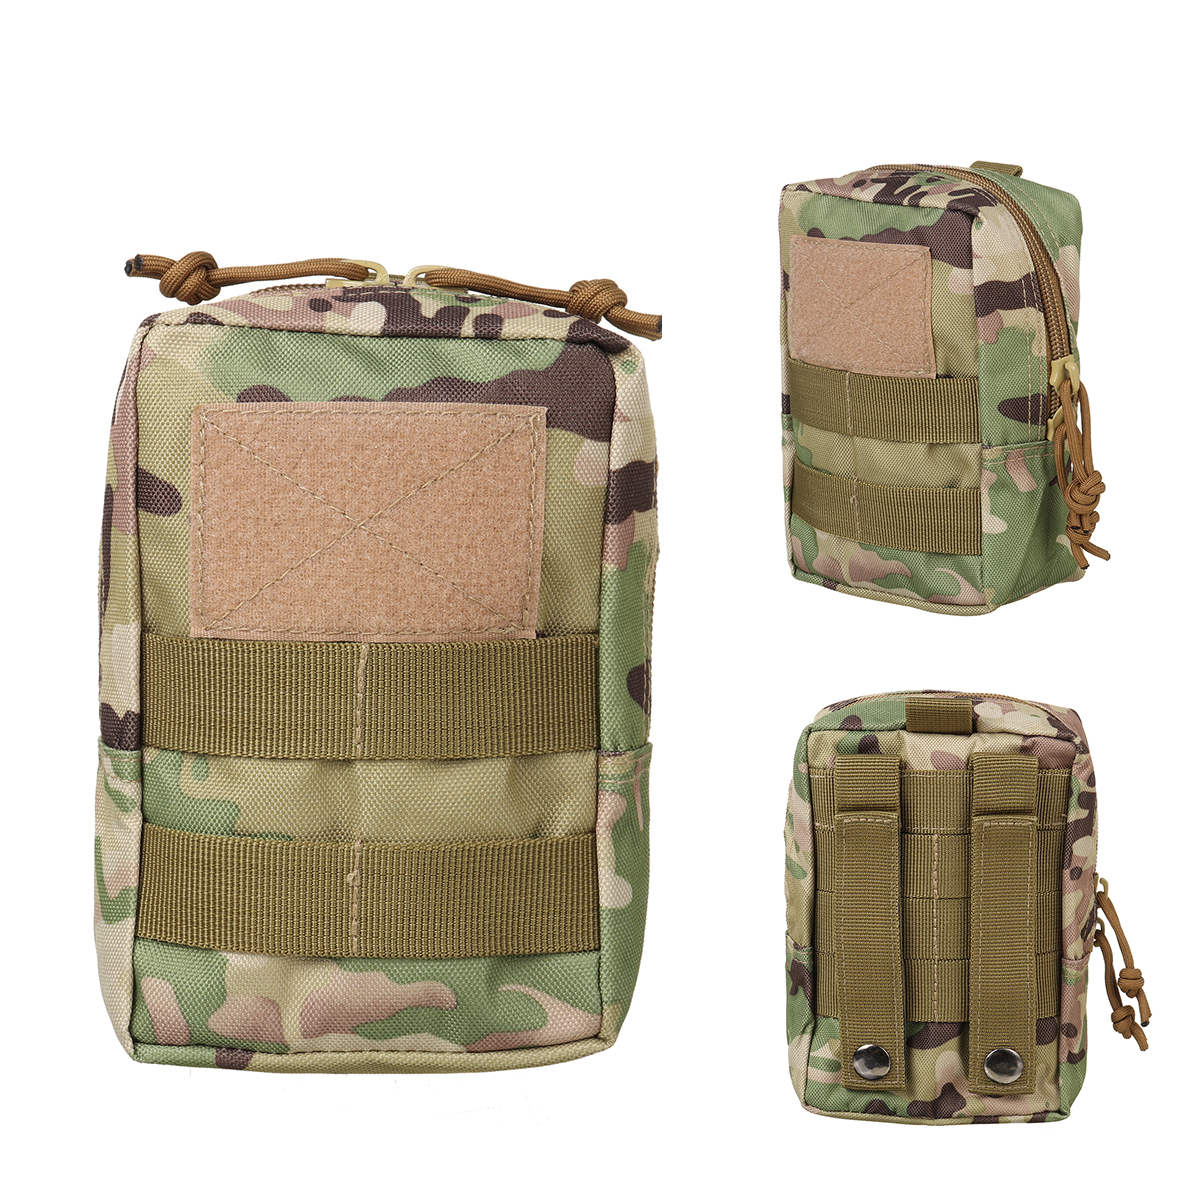 Military-Tactical-Camo-Belt-Pouch-Bag-Pack-Phone-Bags-Molle-Pouch-Camping-Waist-Pocket-Bag-Phone-Cas-1777605-3